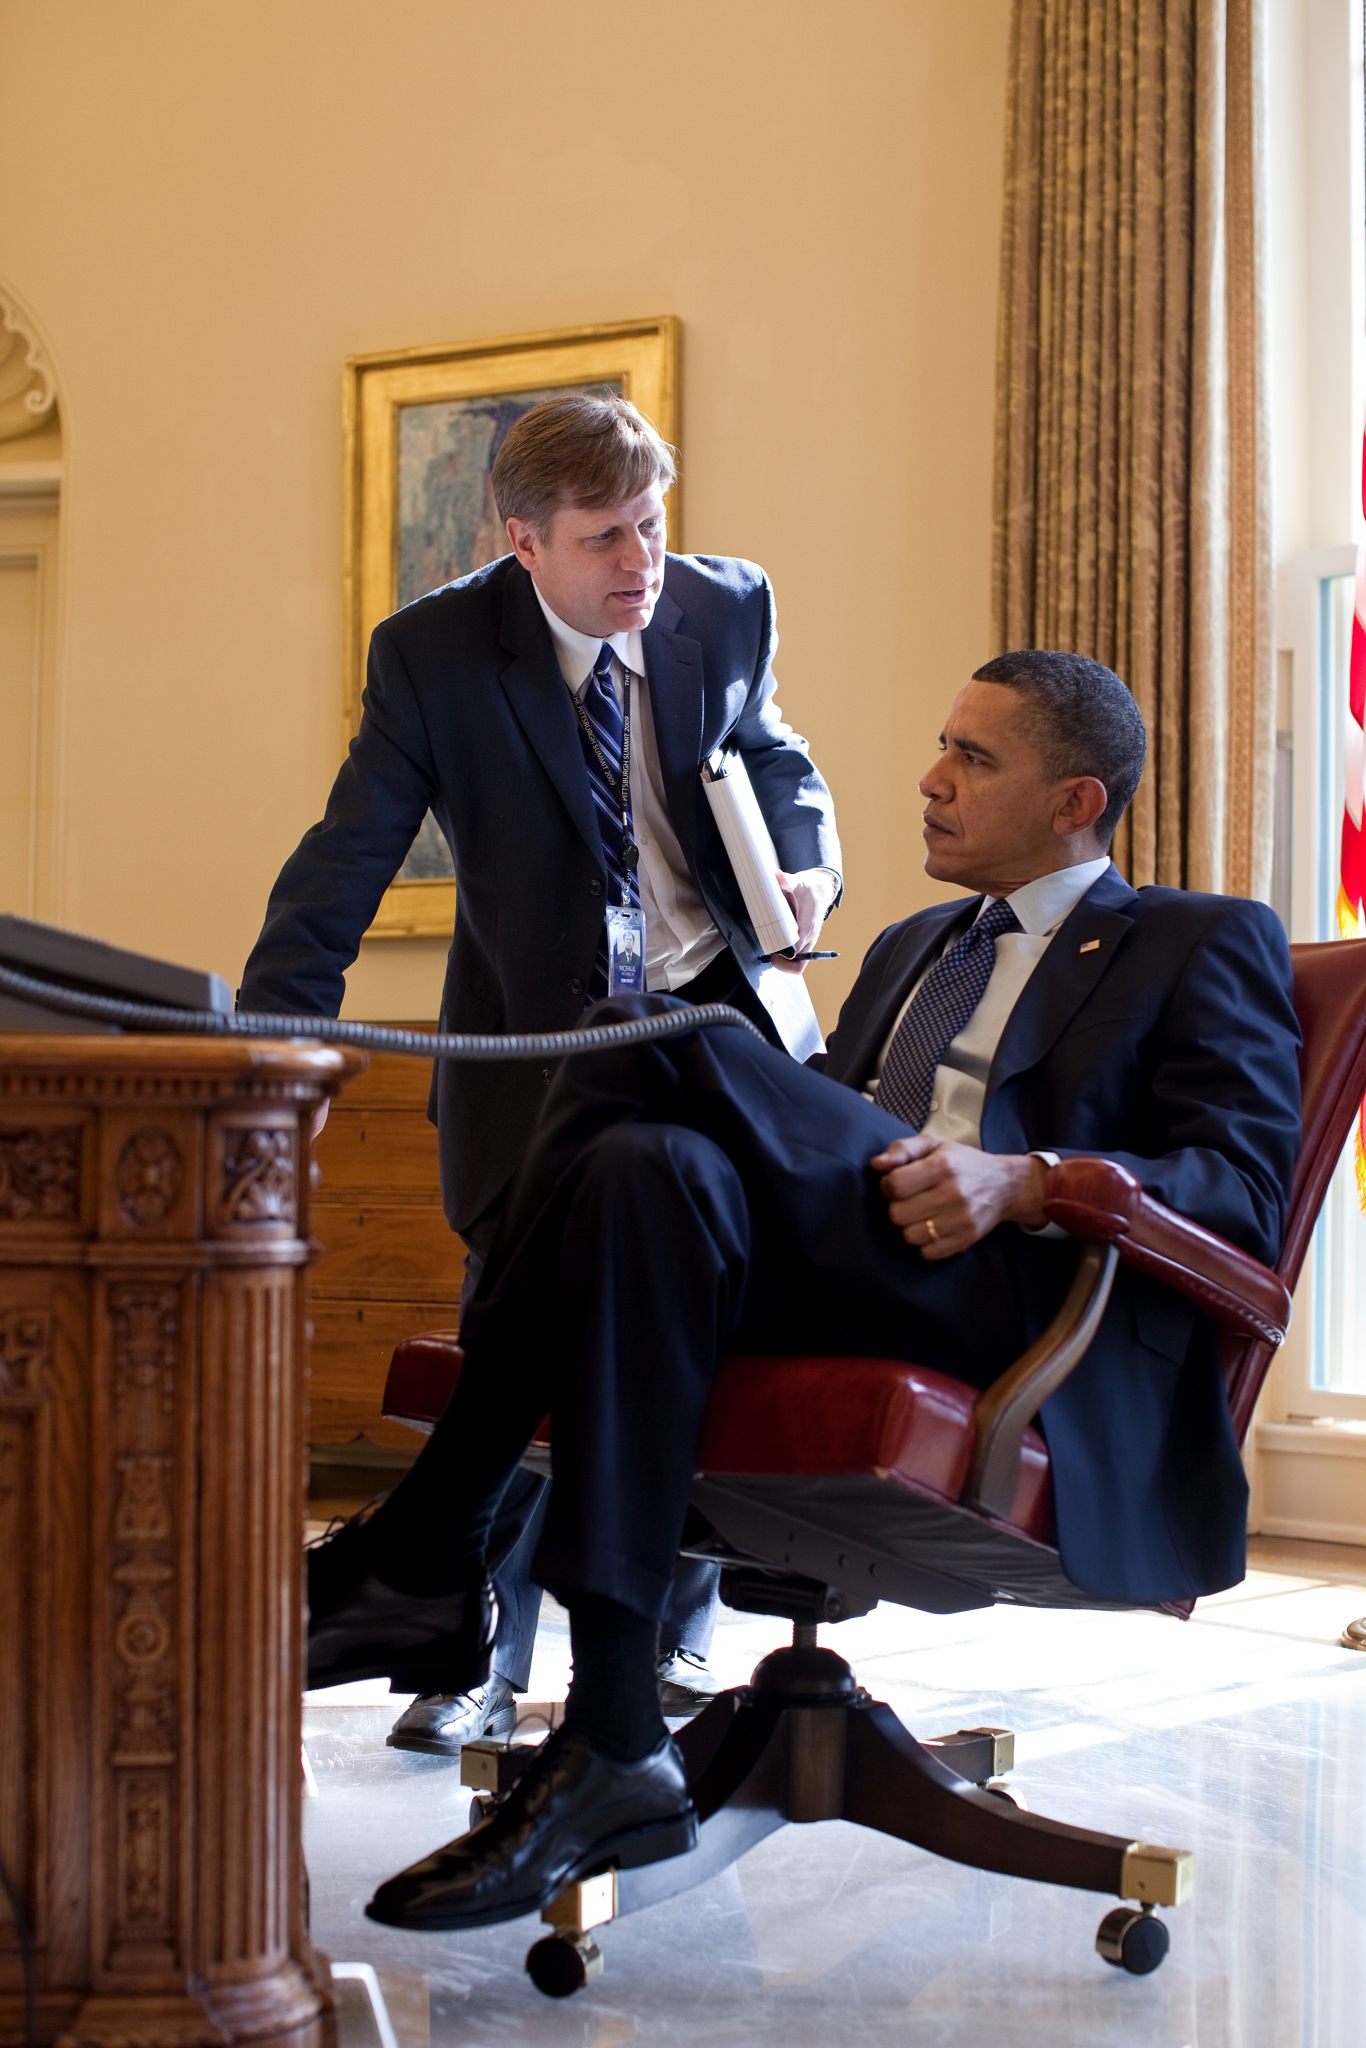 Mike McFaul briefs President Barack Obama in the Oval Office, February 24, 2010. (Official White House Photo by Pete Souza)